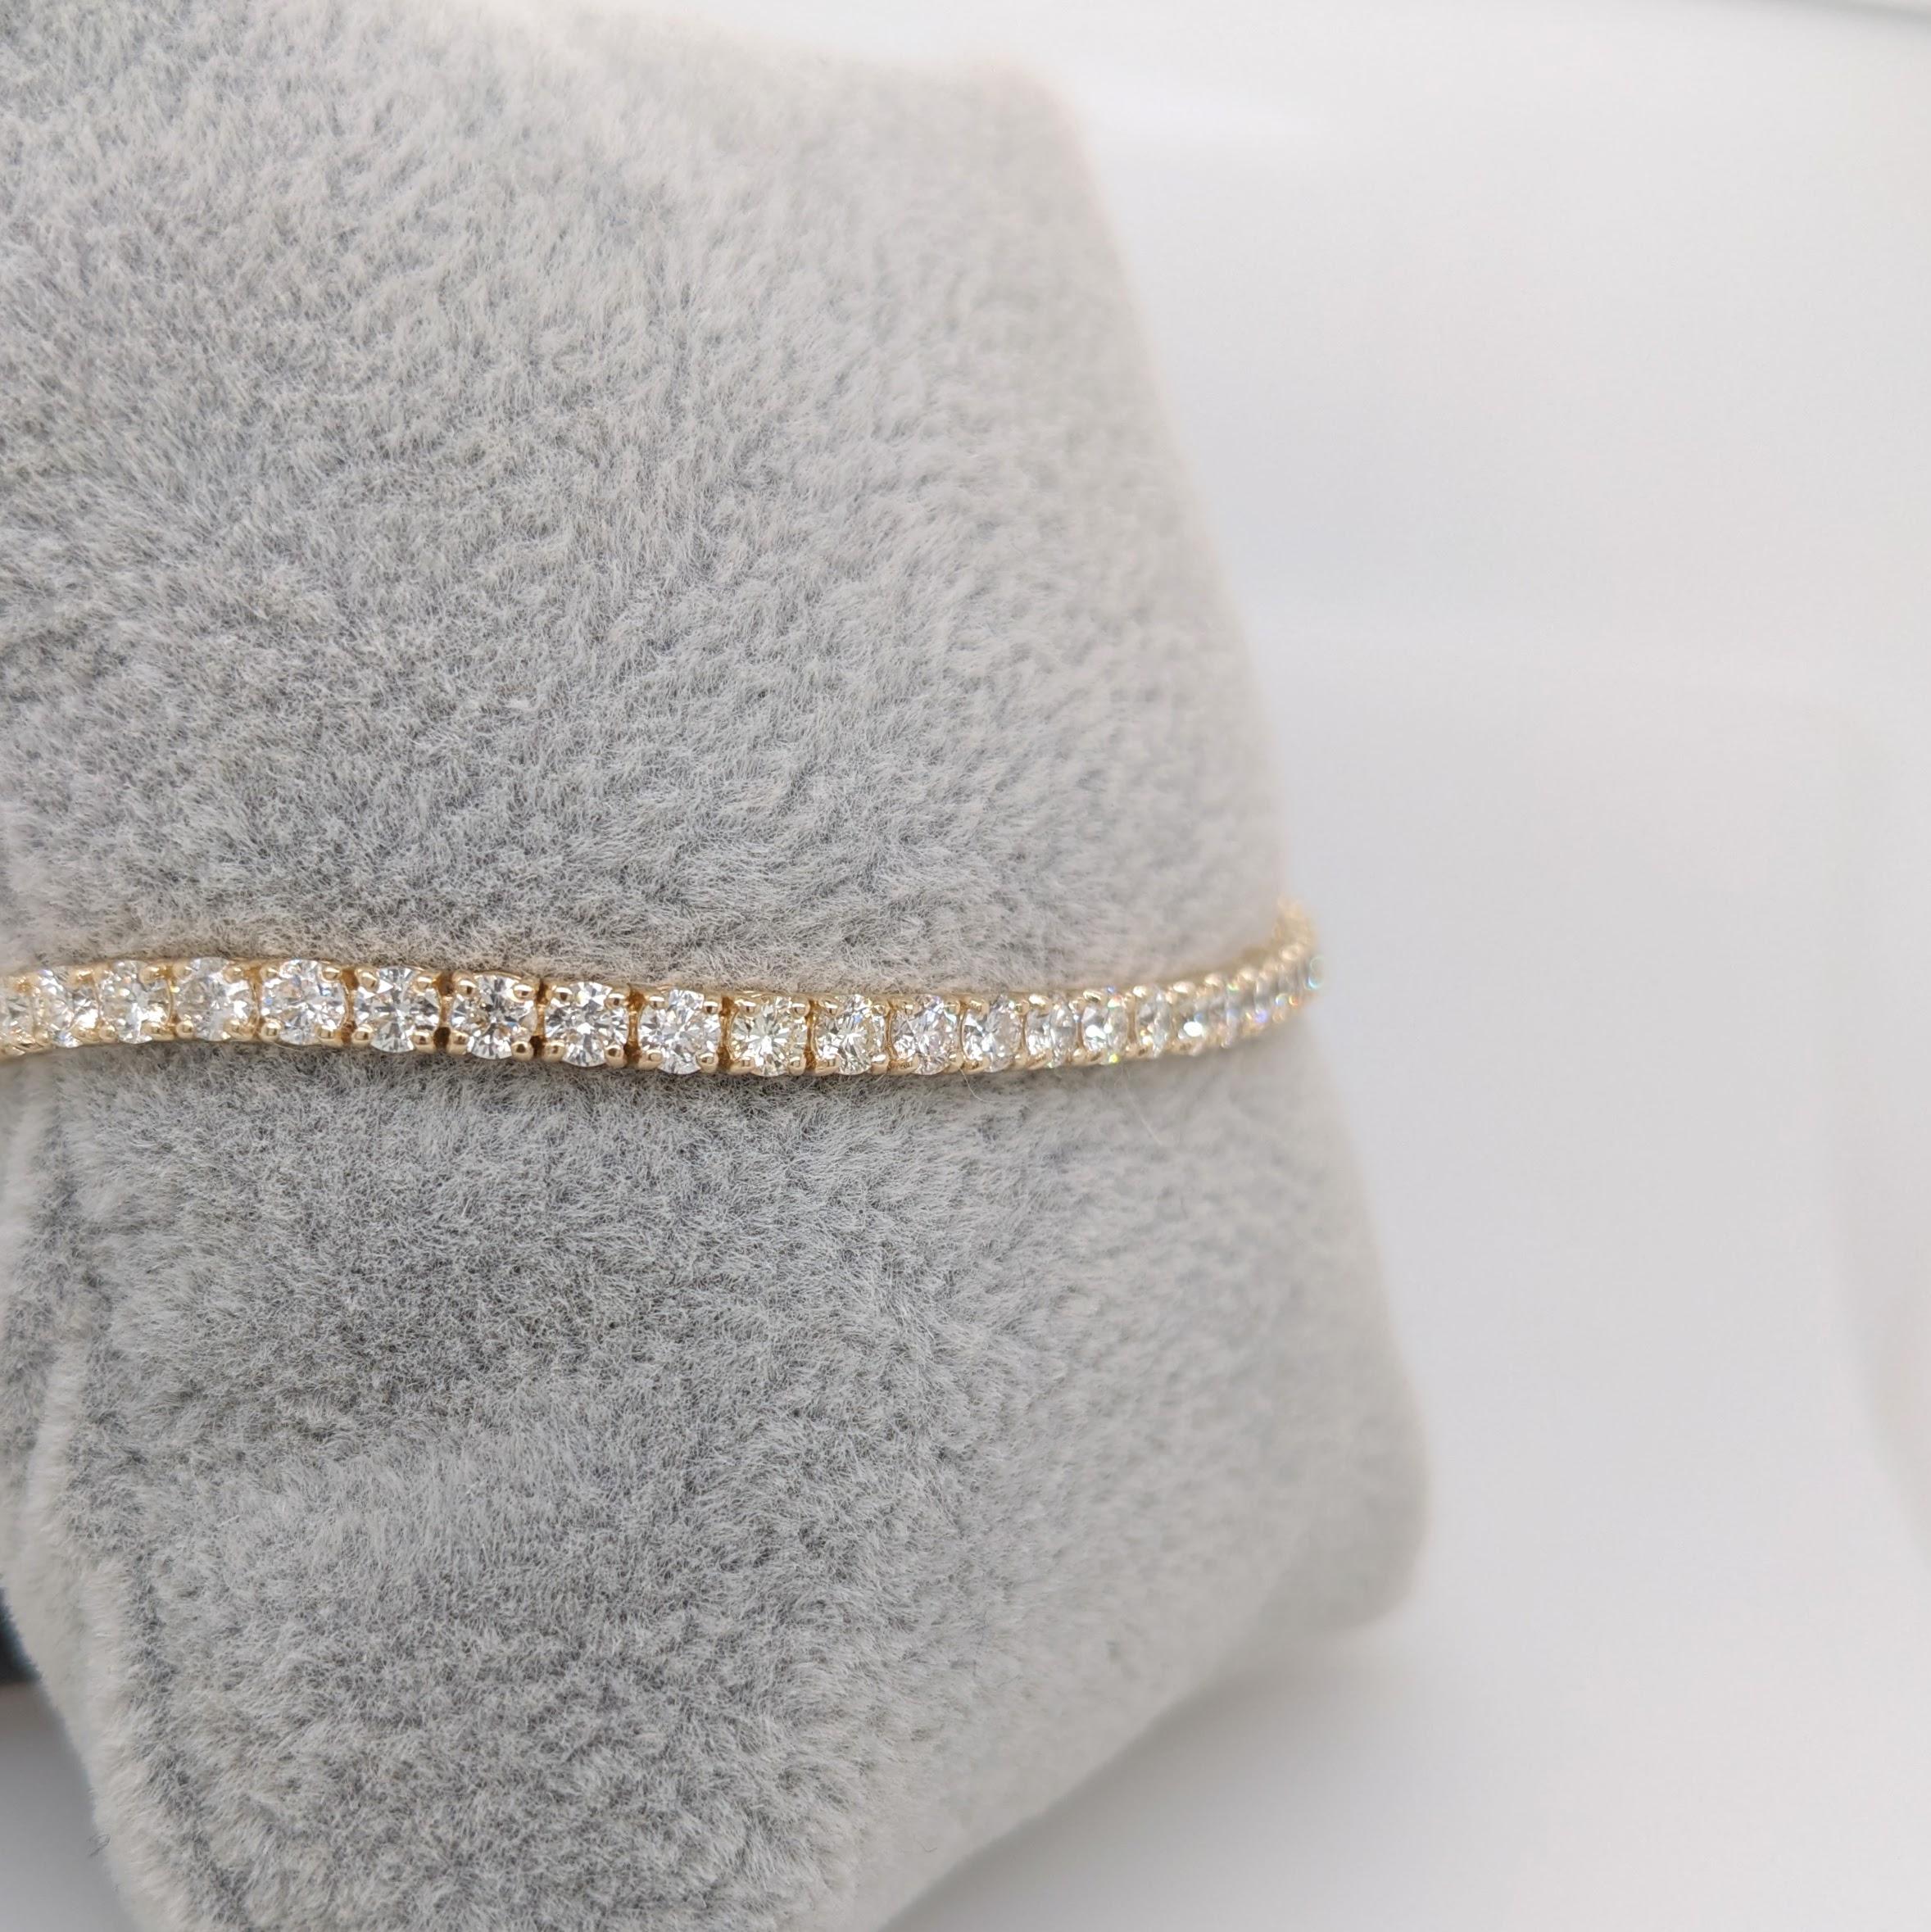 5.04cts Diamond Tennis Bracelet in 14K Yellow Gold with Secure Clasp 4 Prong In New Condition For Sale In Columbus, OH